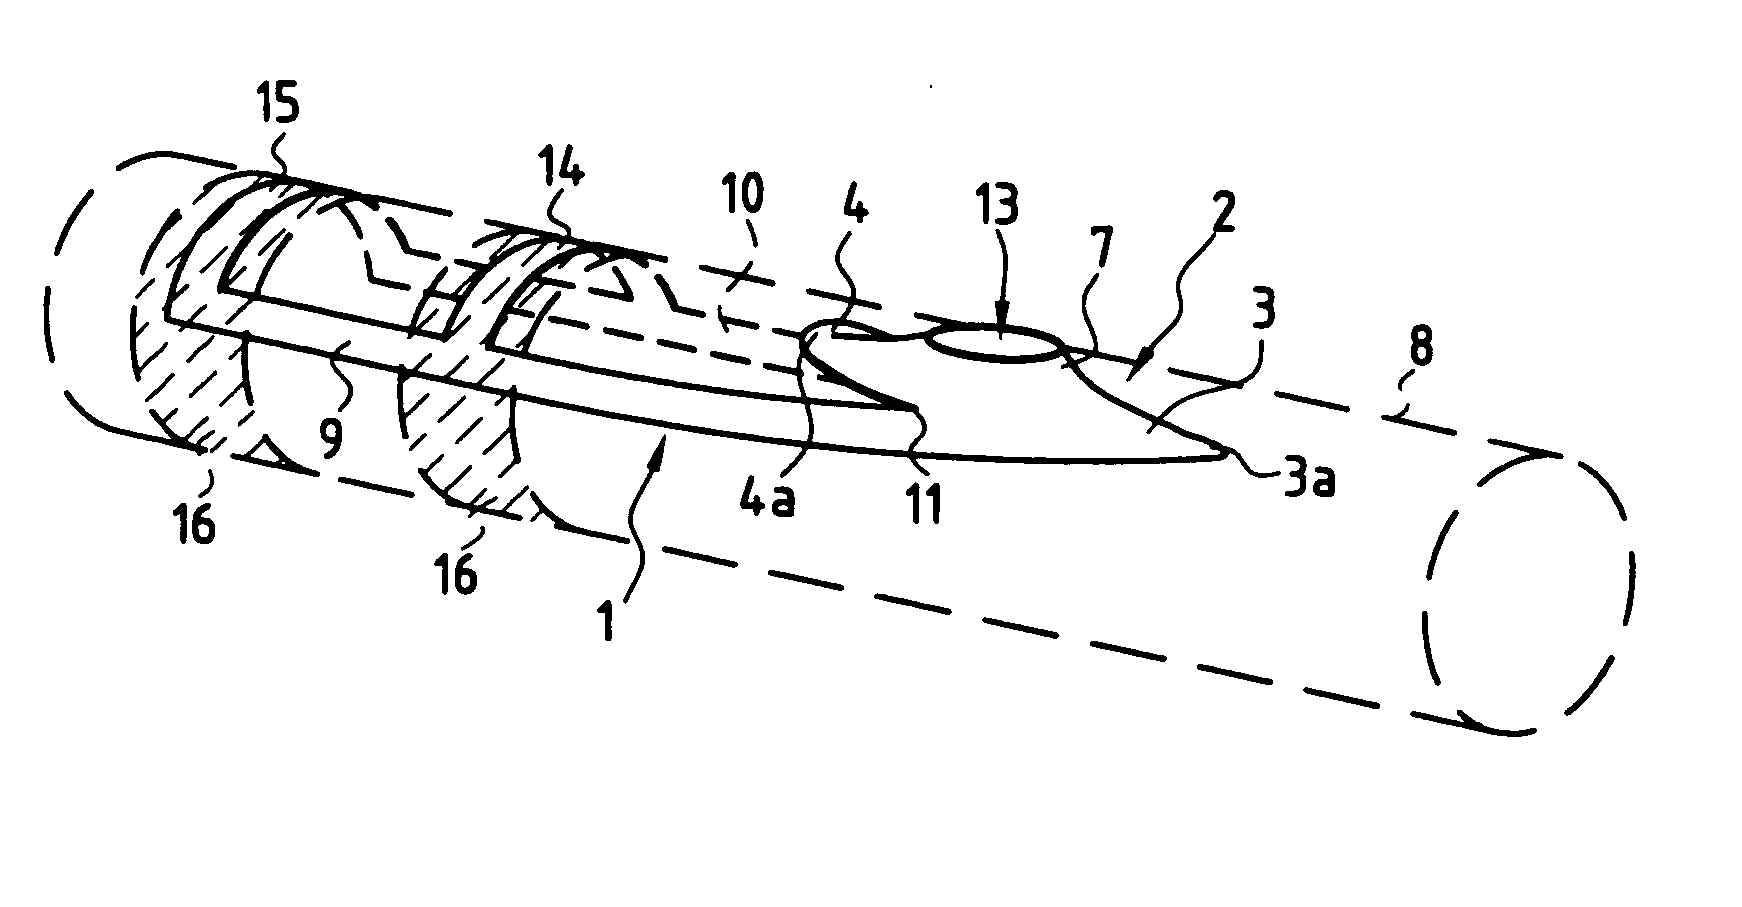 Fishing accessory, in particular a line cutter